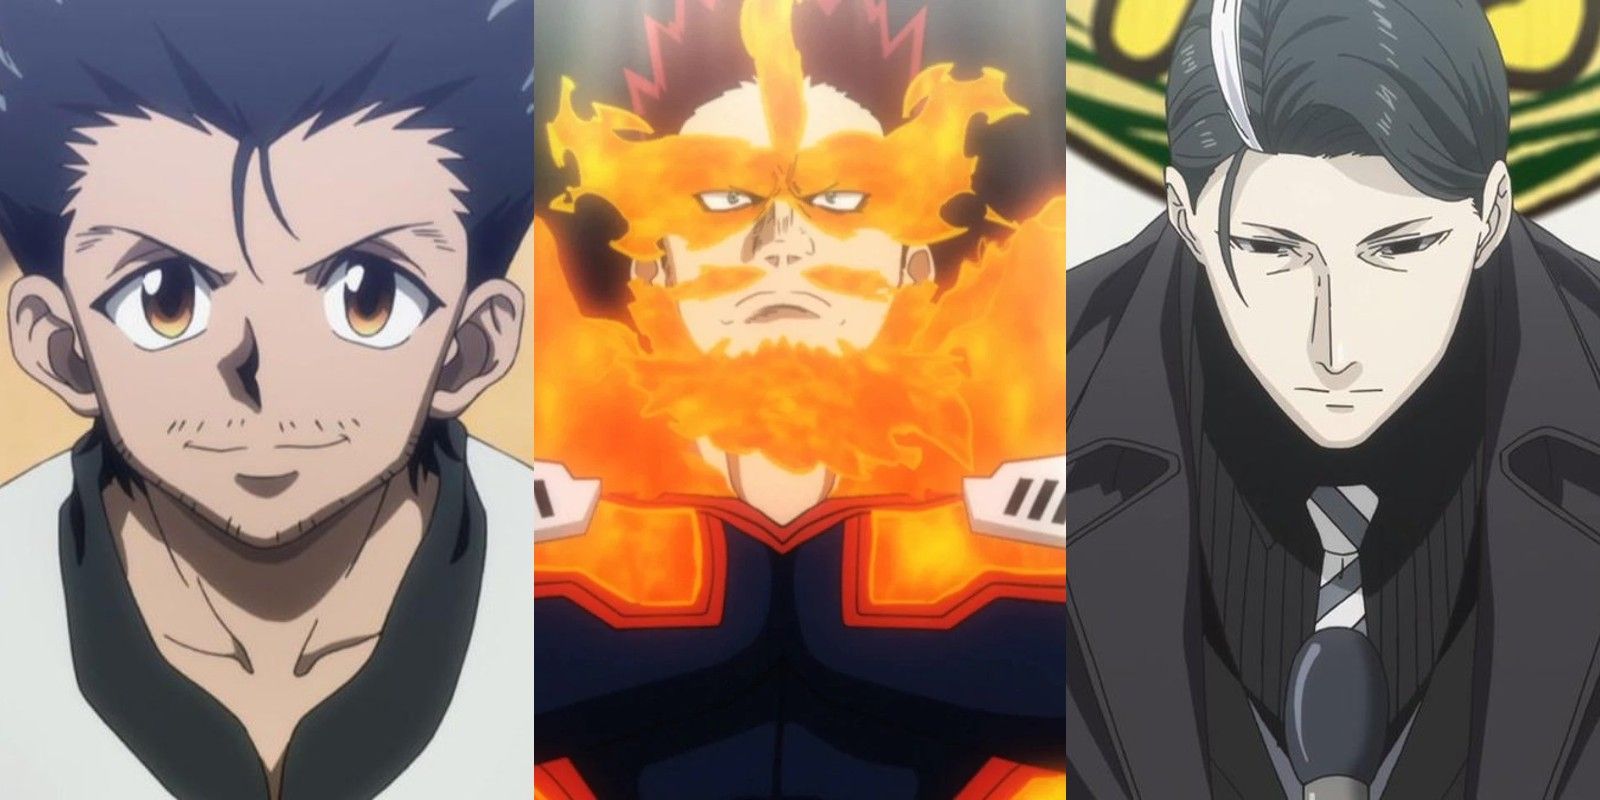 Ging, Endeavor, and Azami from Hunter x Hunter, My Hero Academia, and Food Wars